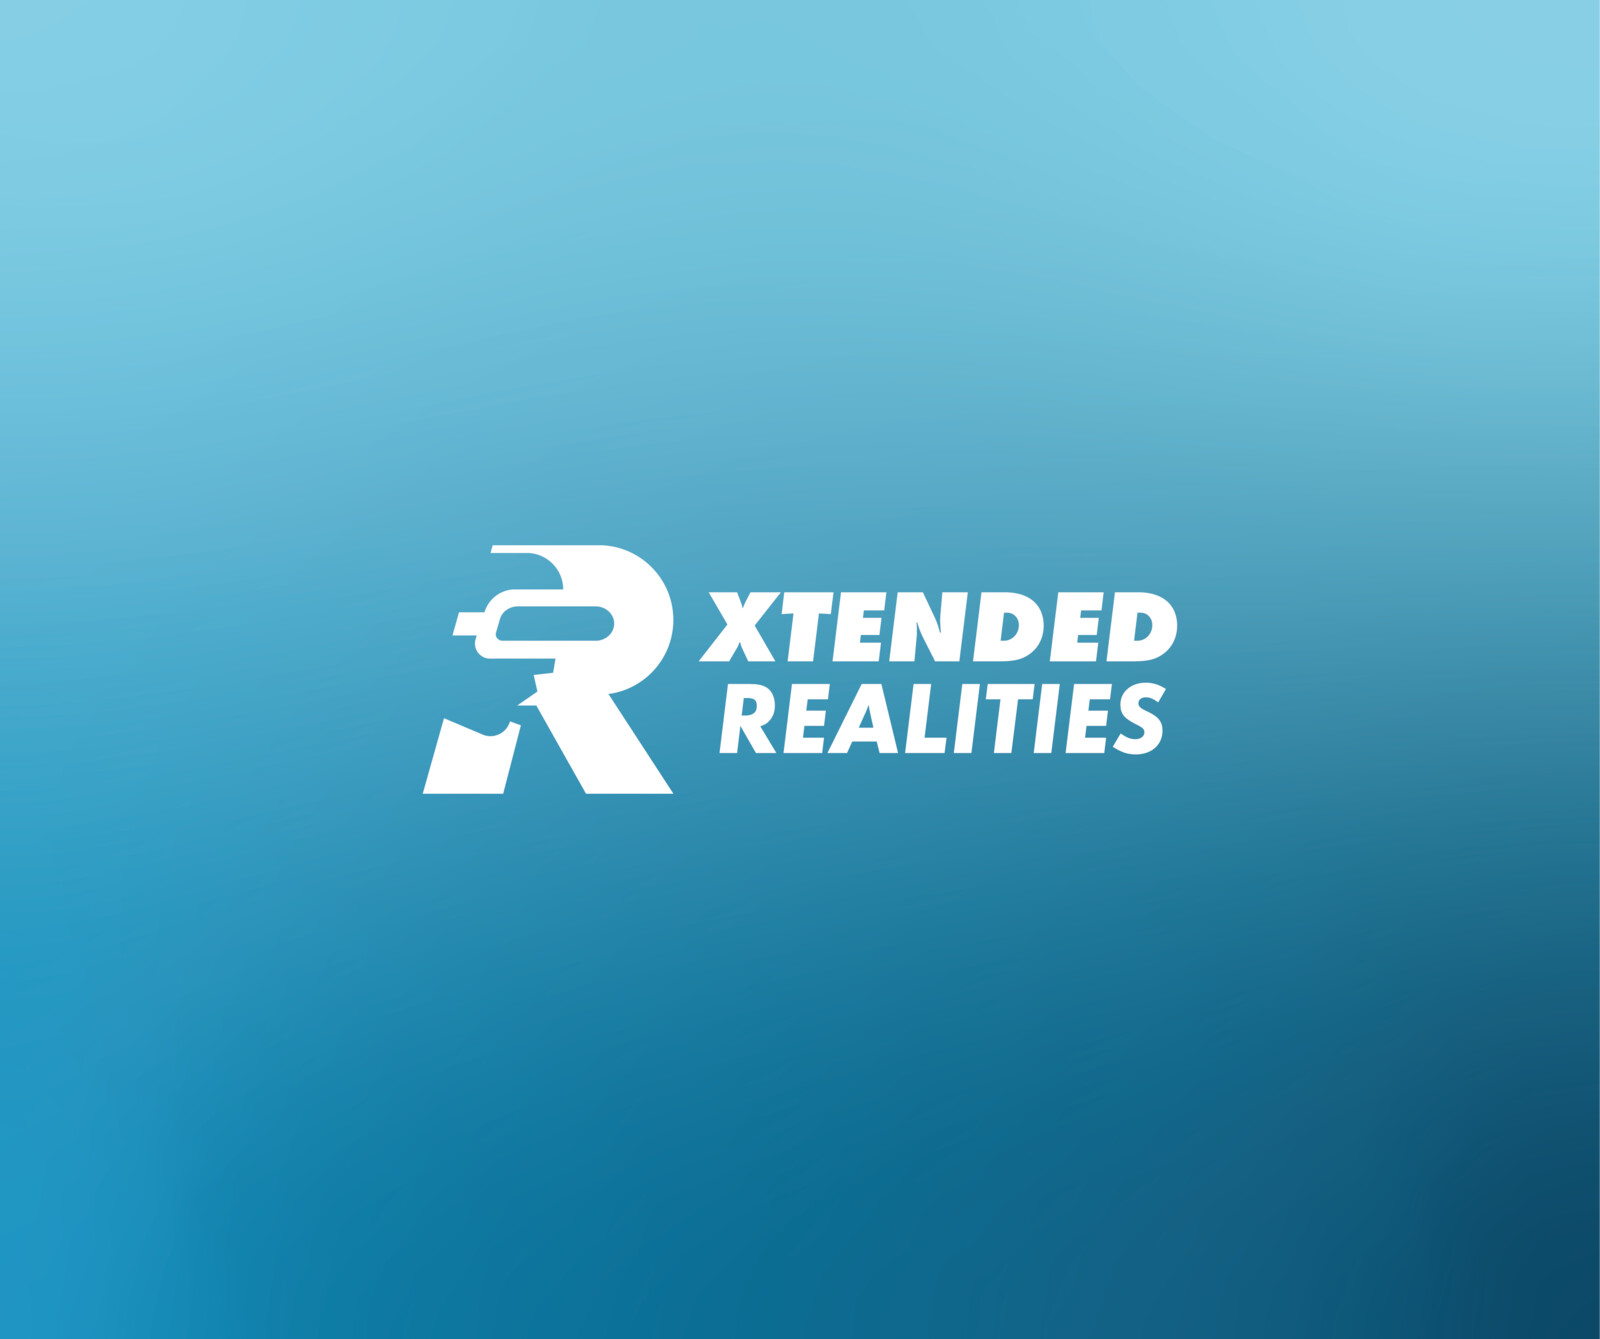 Xtended Realities